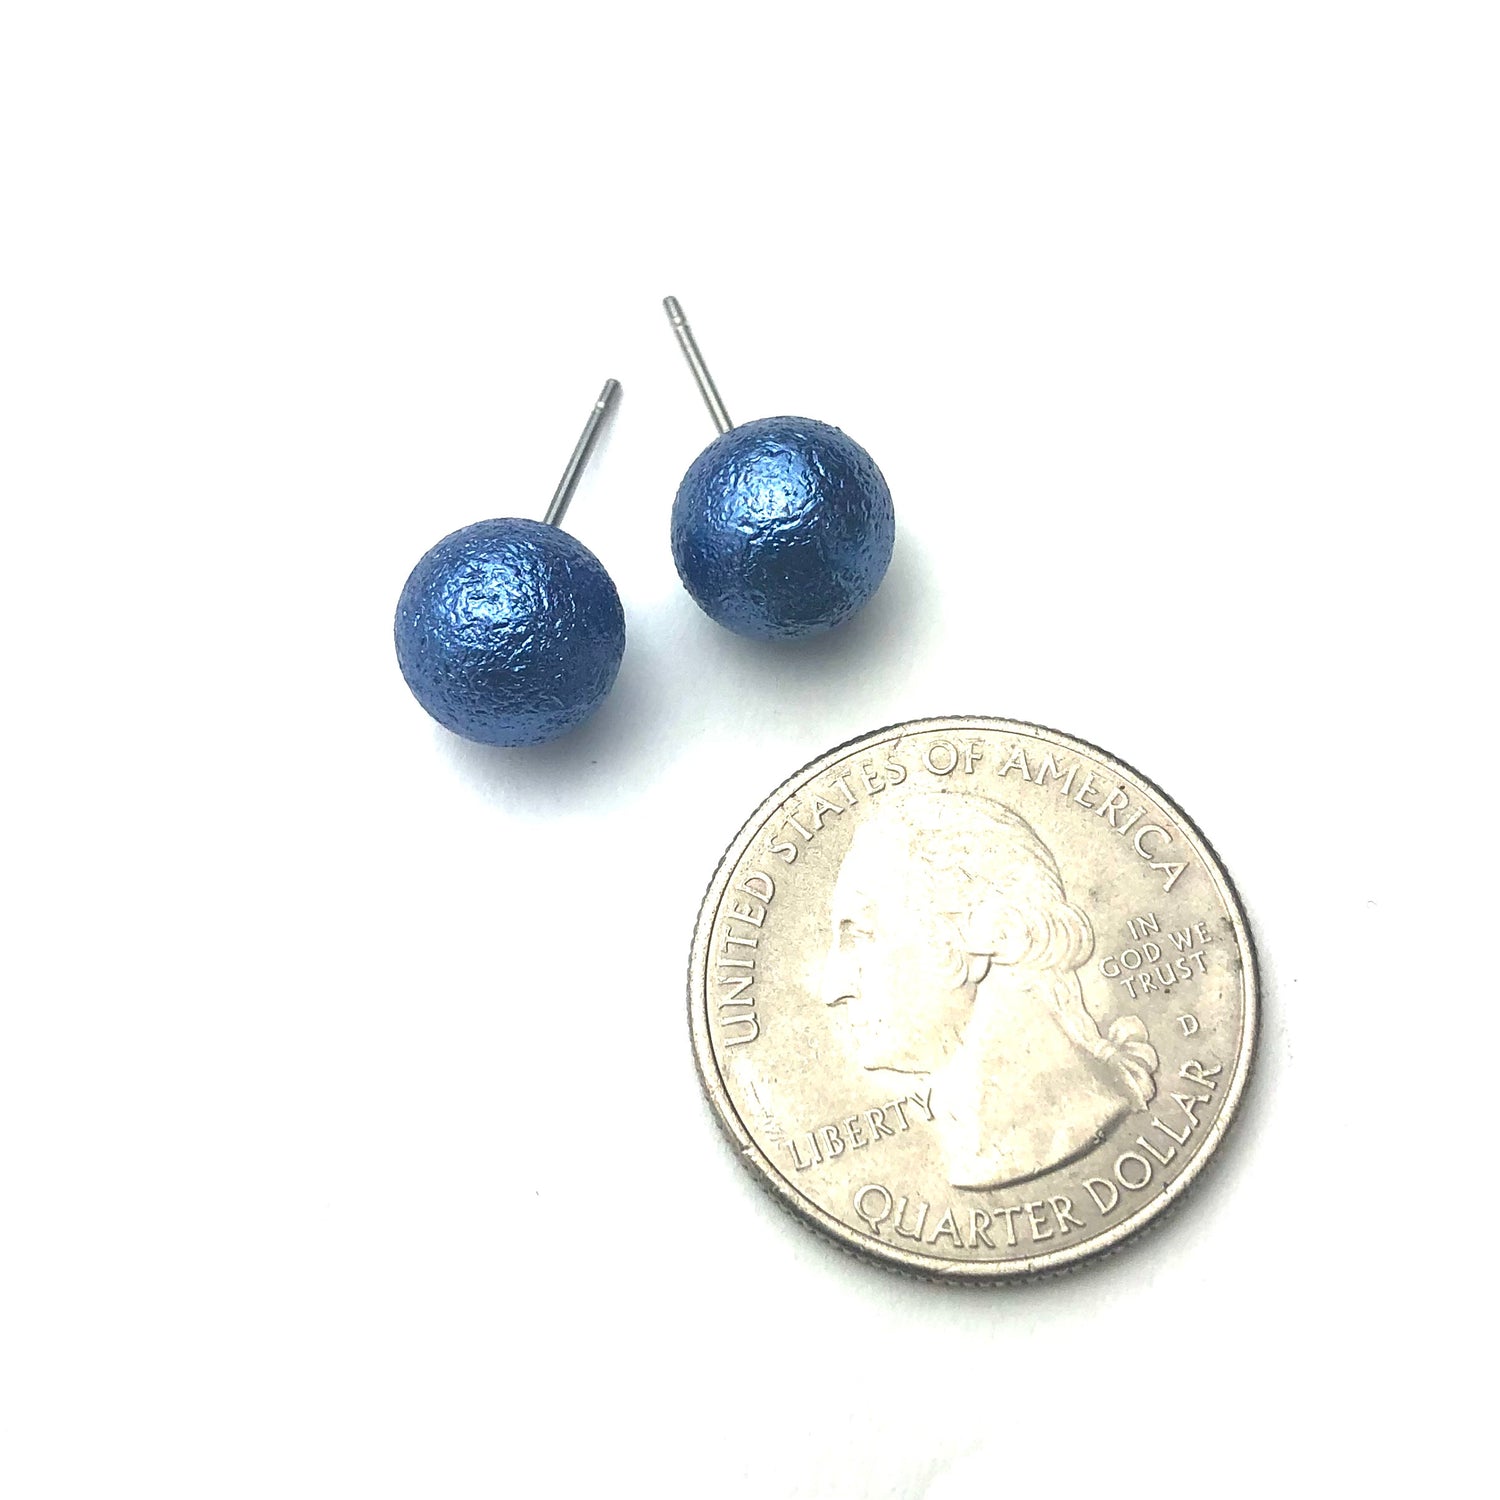 Midnight Blue Pitted Lucite Large Ball Stud Earrings